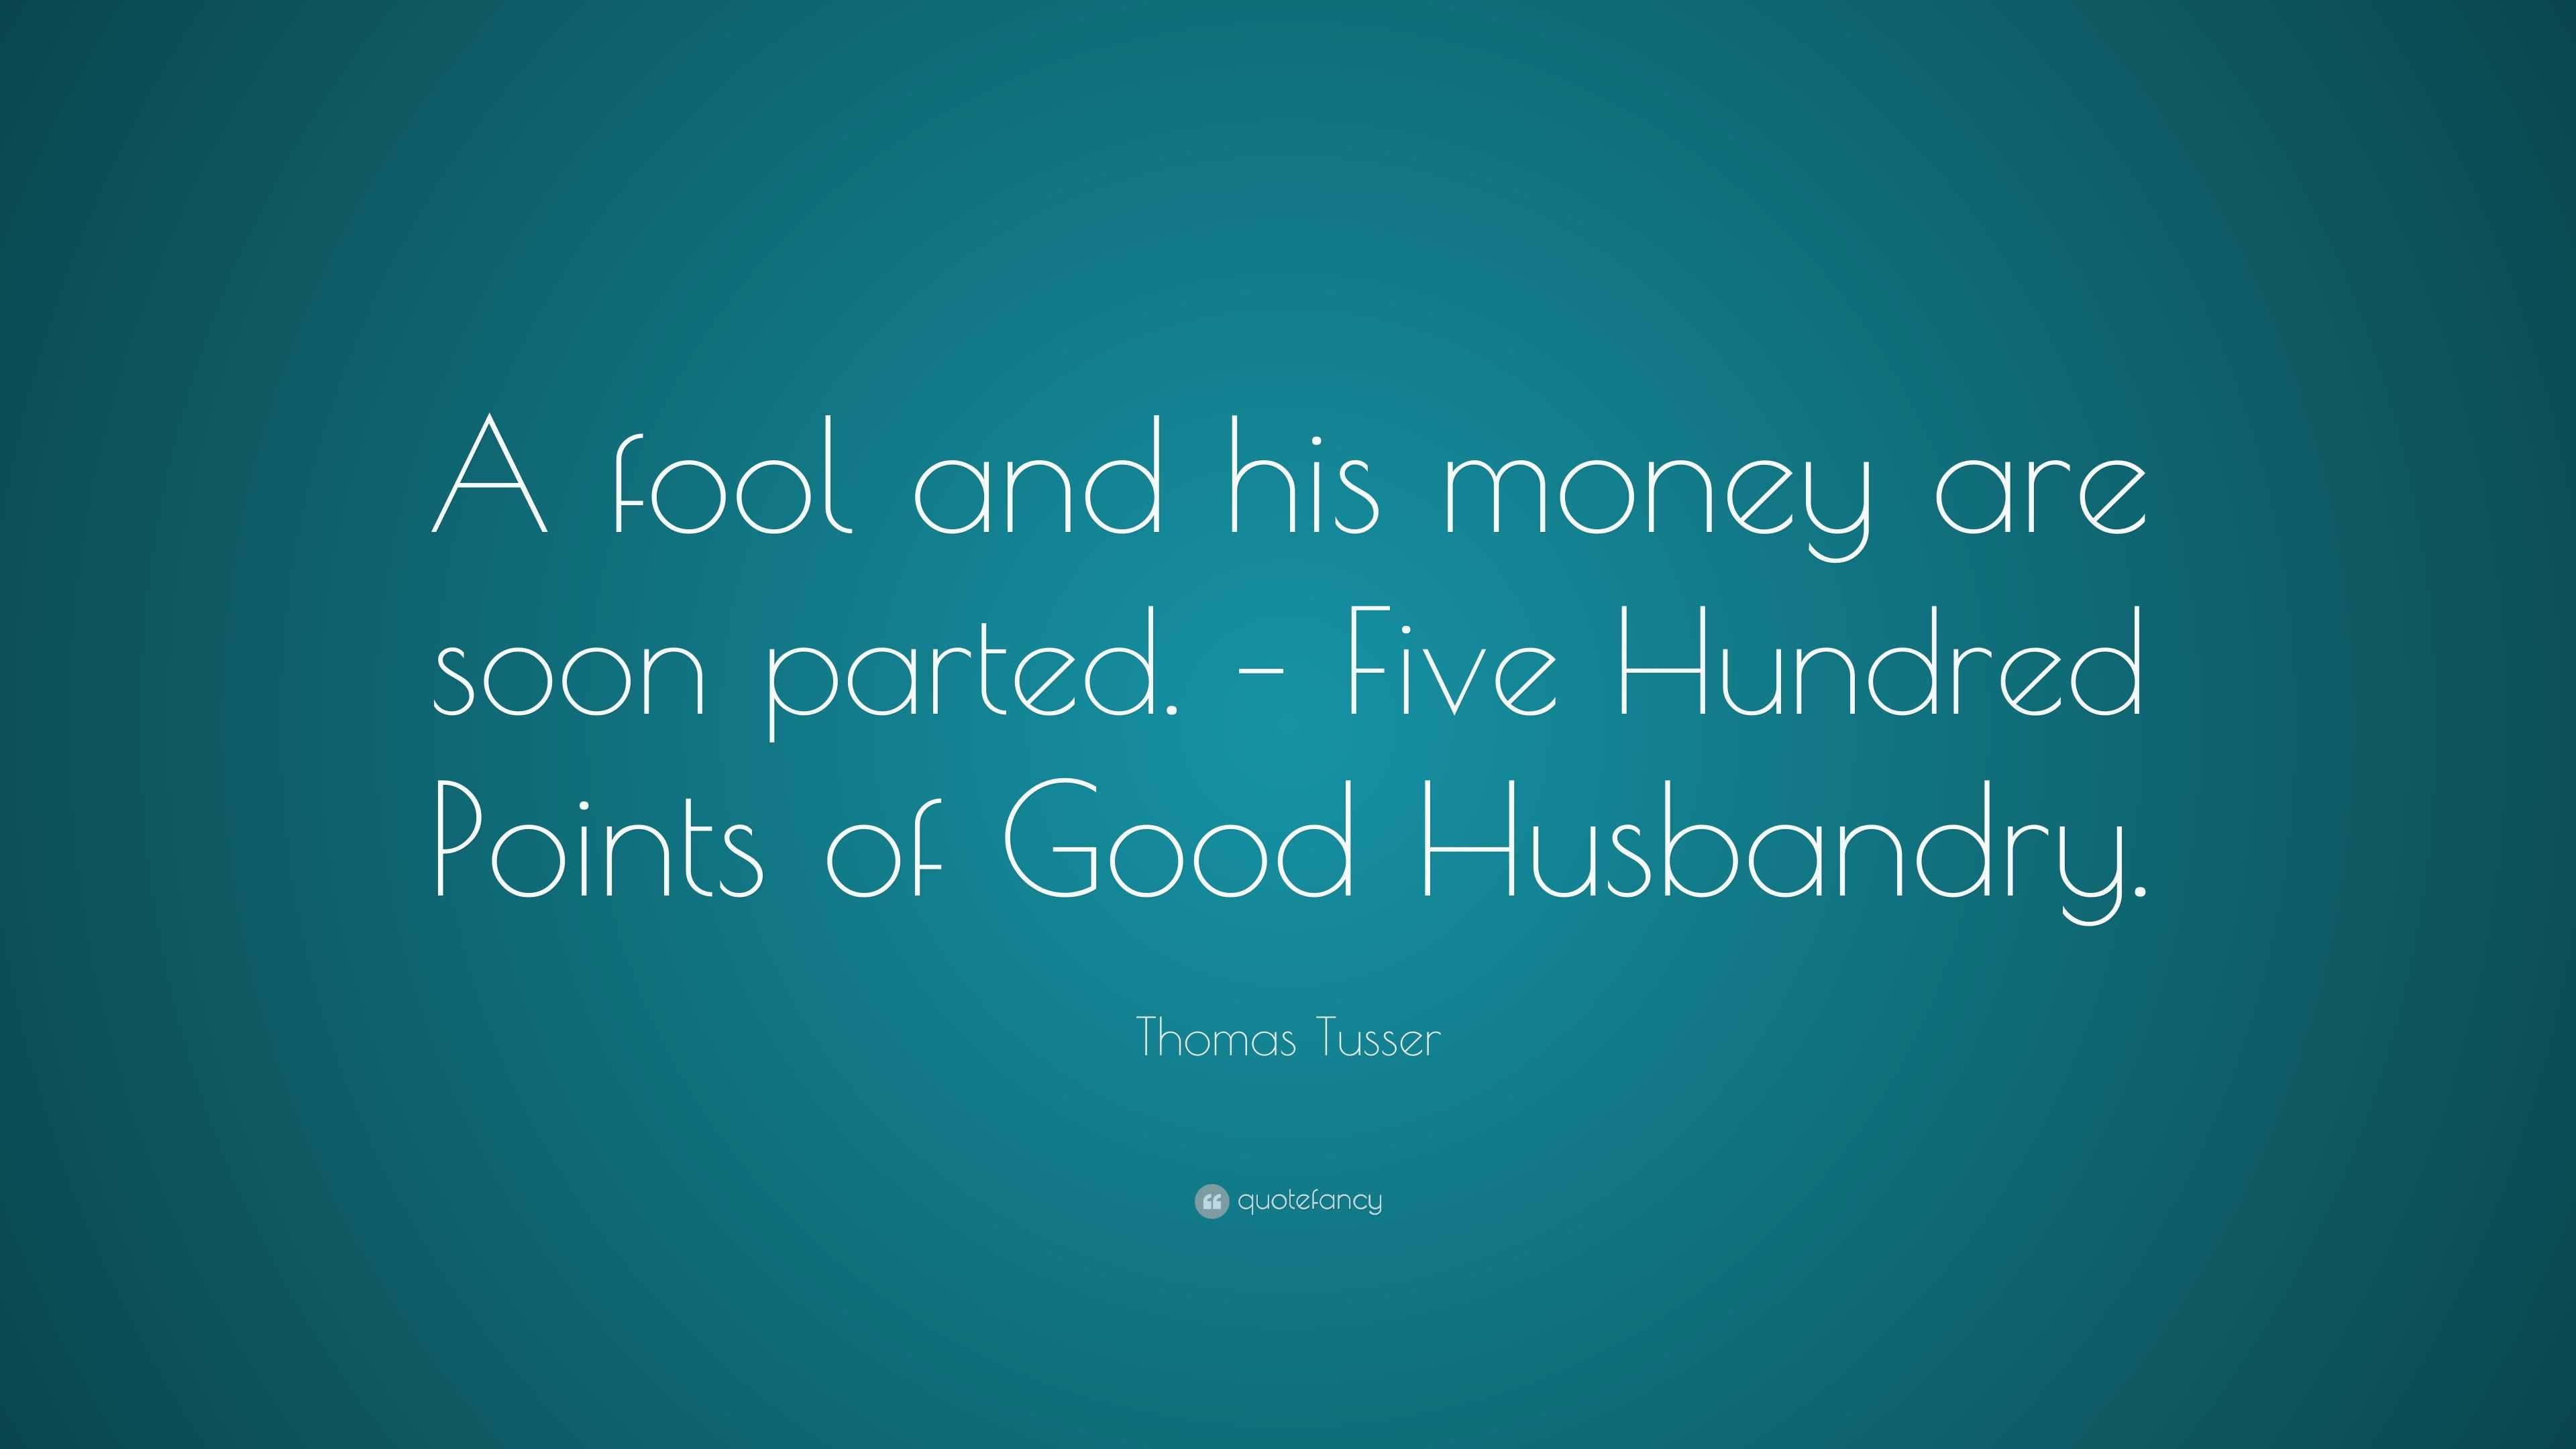 Thomas Tusser Quote: "A fool and his money are soon parted. - Five Hundred Points of Good ...